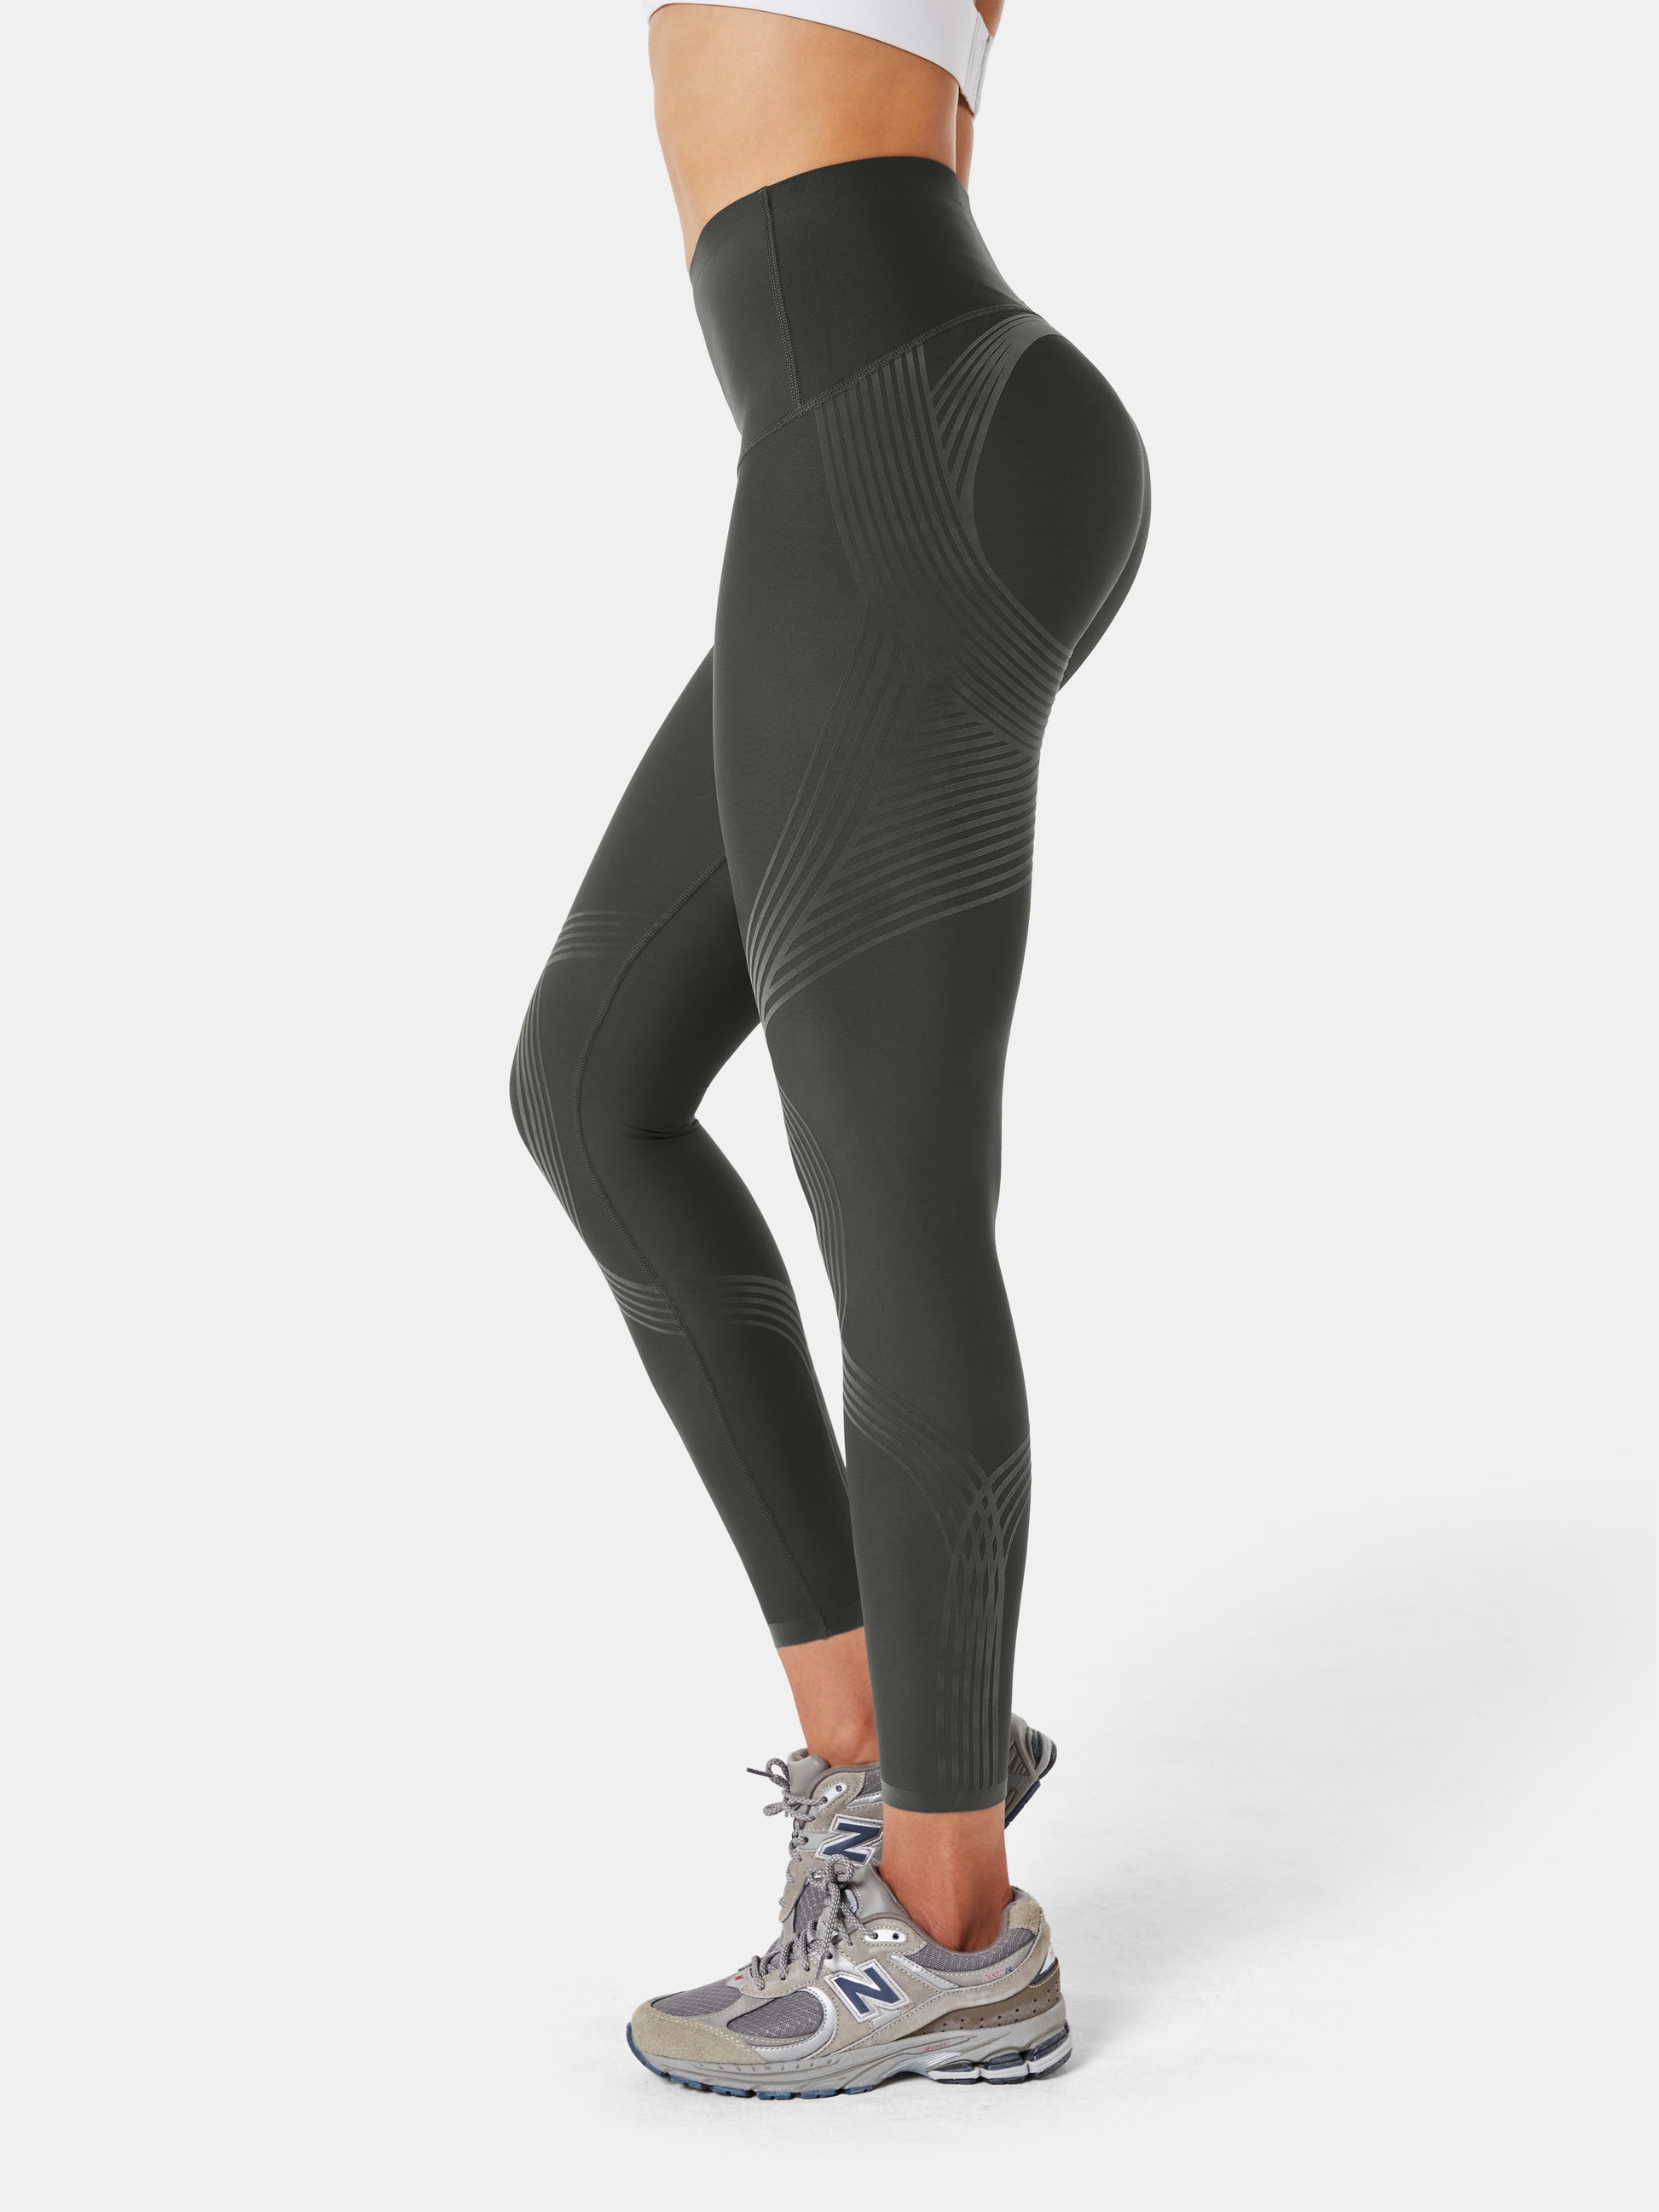 Five-star leggings. 2 for $24. Go! - Fabletics Email Archive